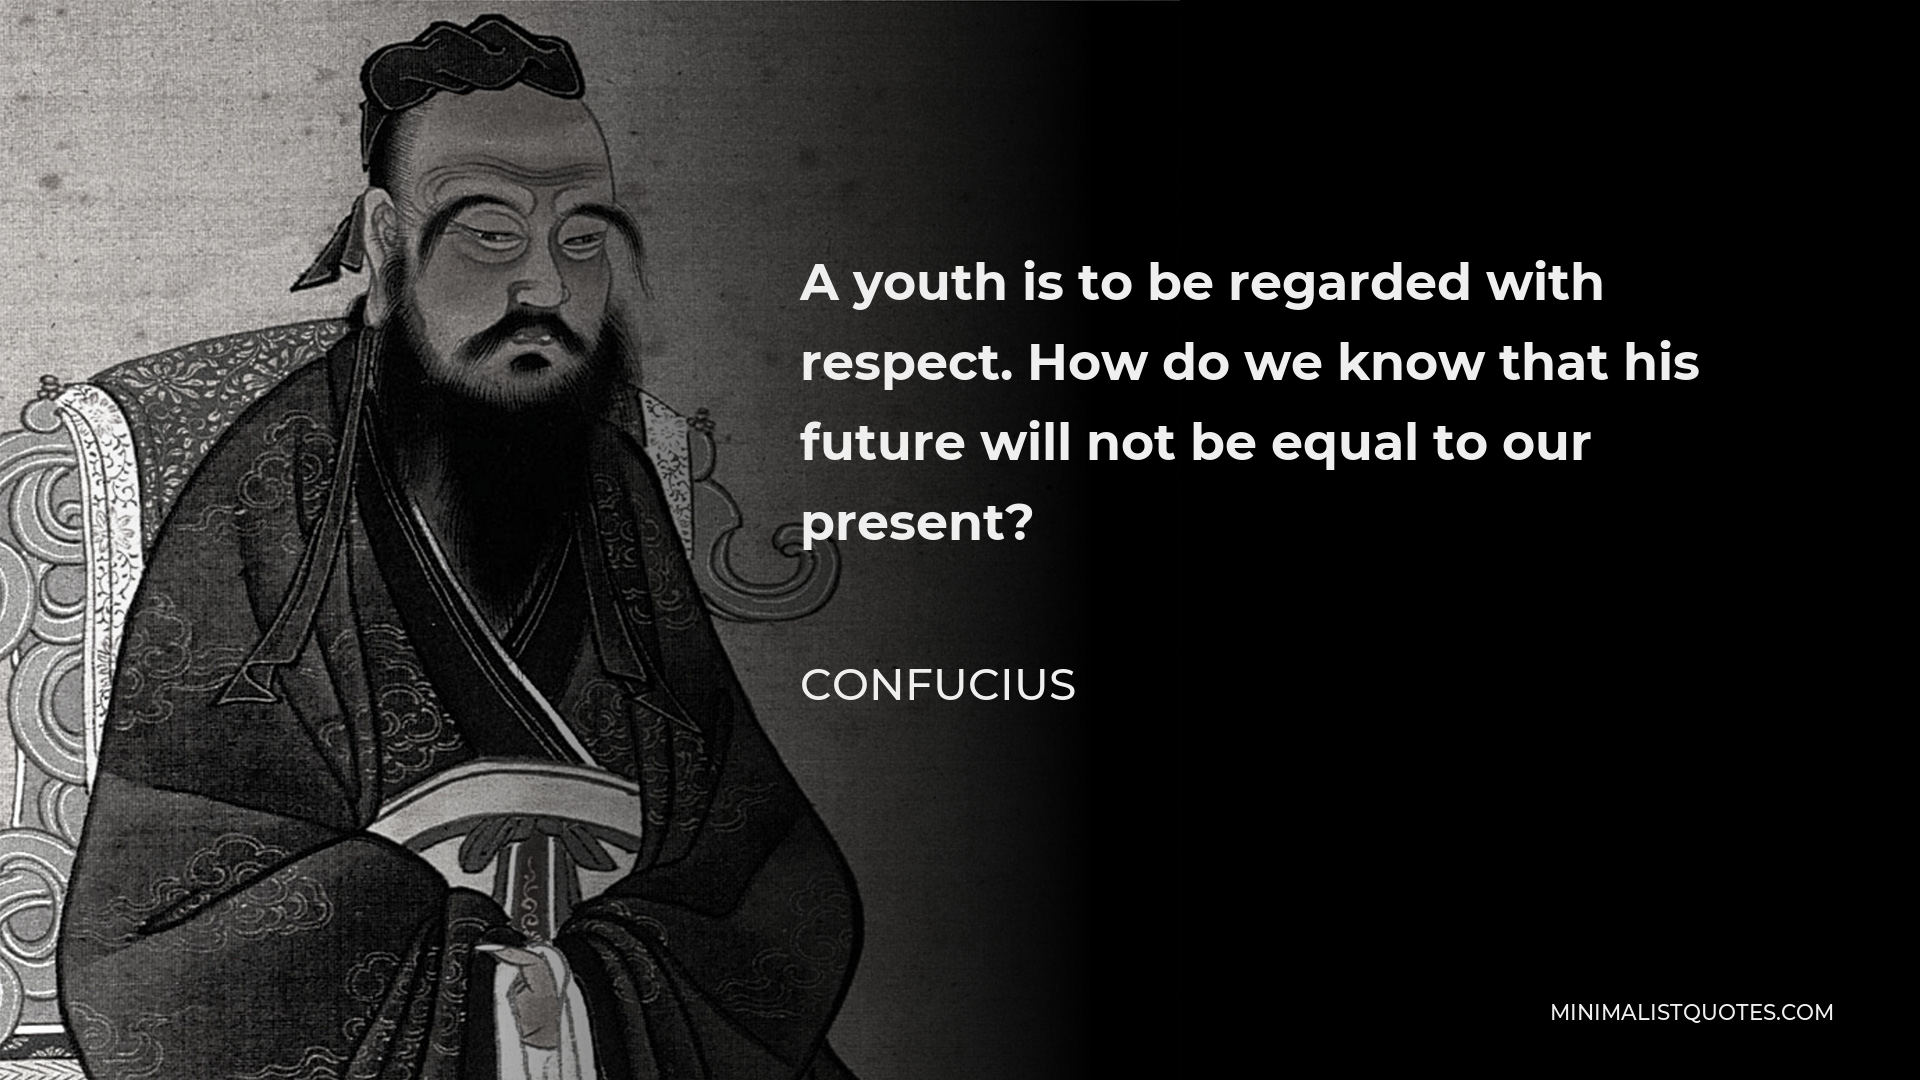 Confucius Quote - A youth is to be regarded with respect. How do we know that his future will not be equal to our present?